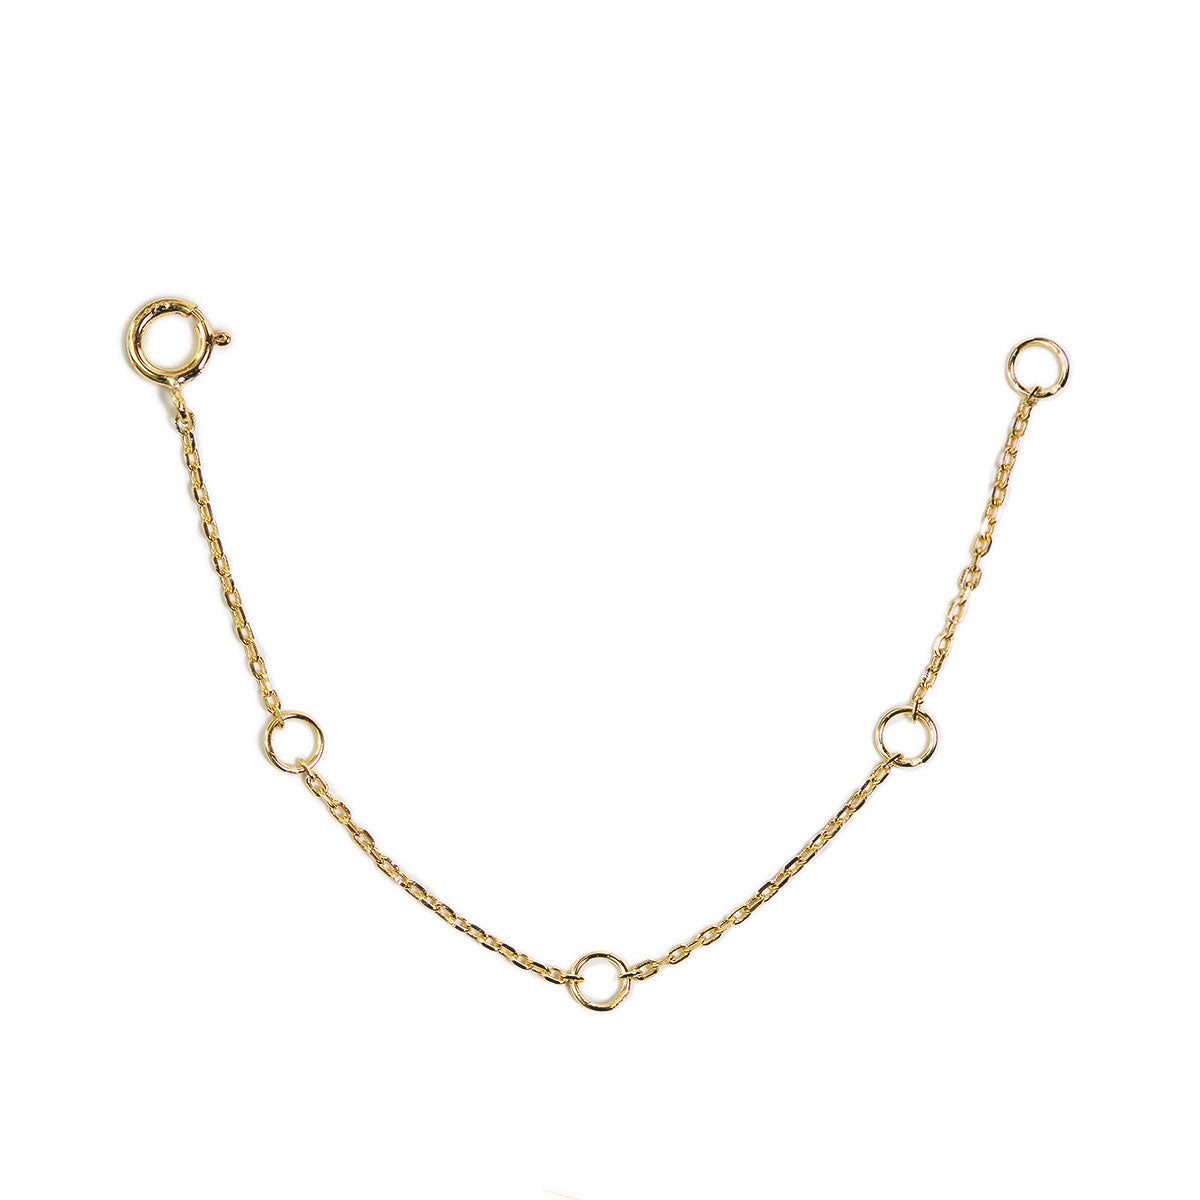 Body Chain or Necklace Extender, Jewelry Extension Gold